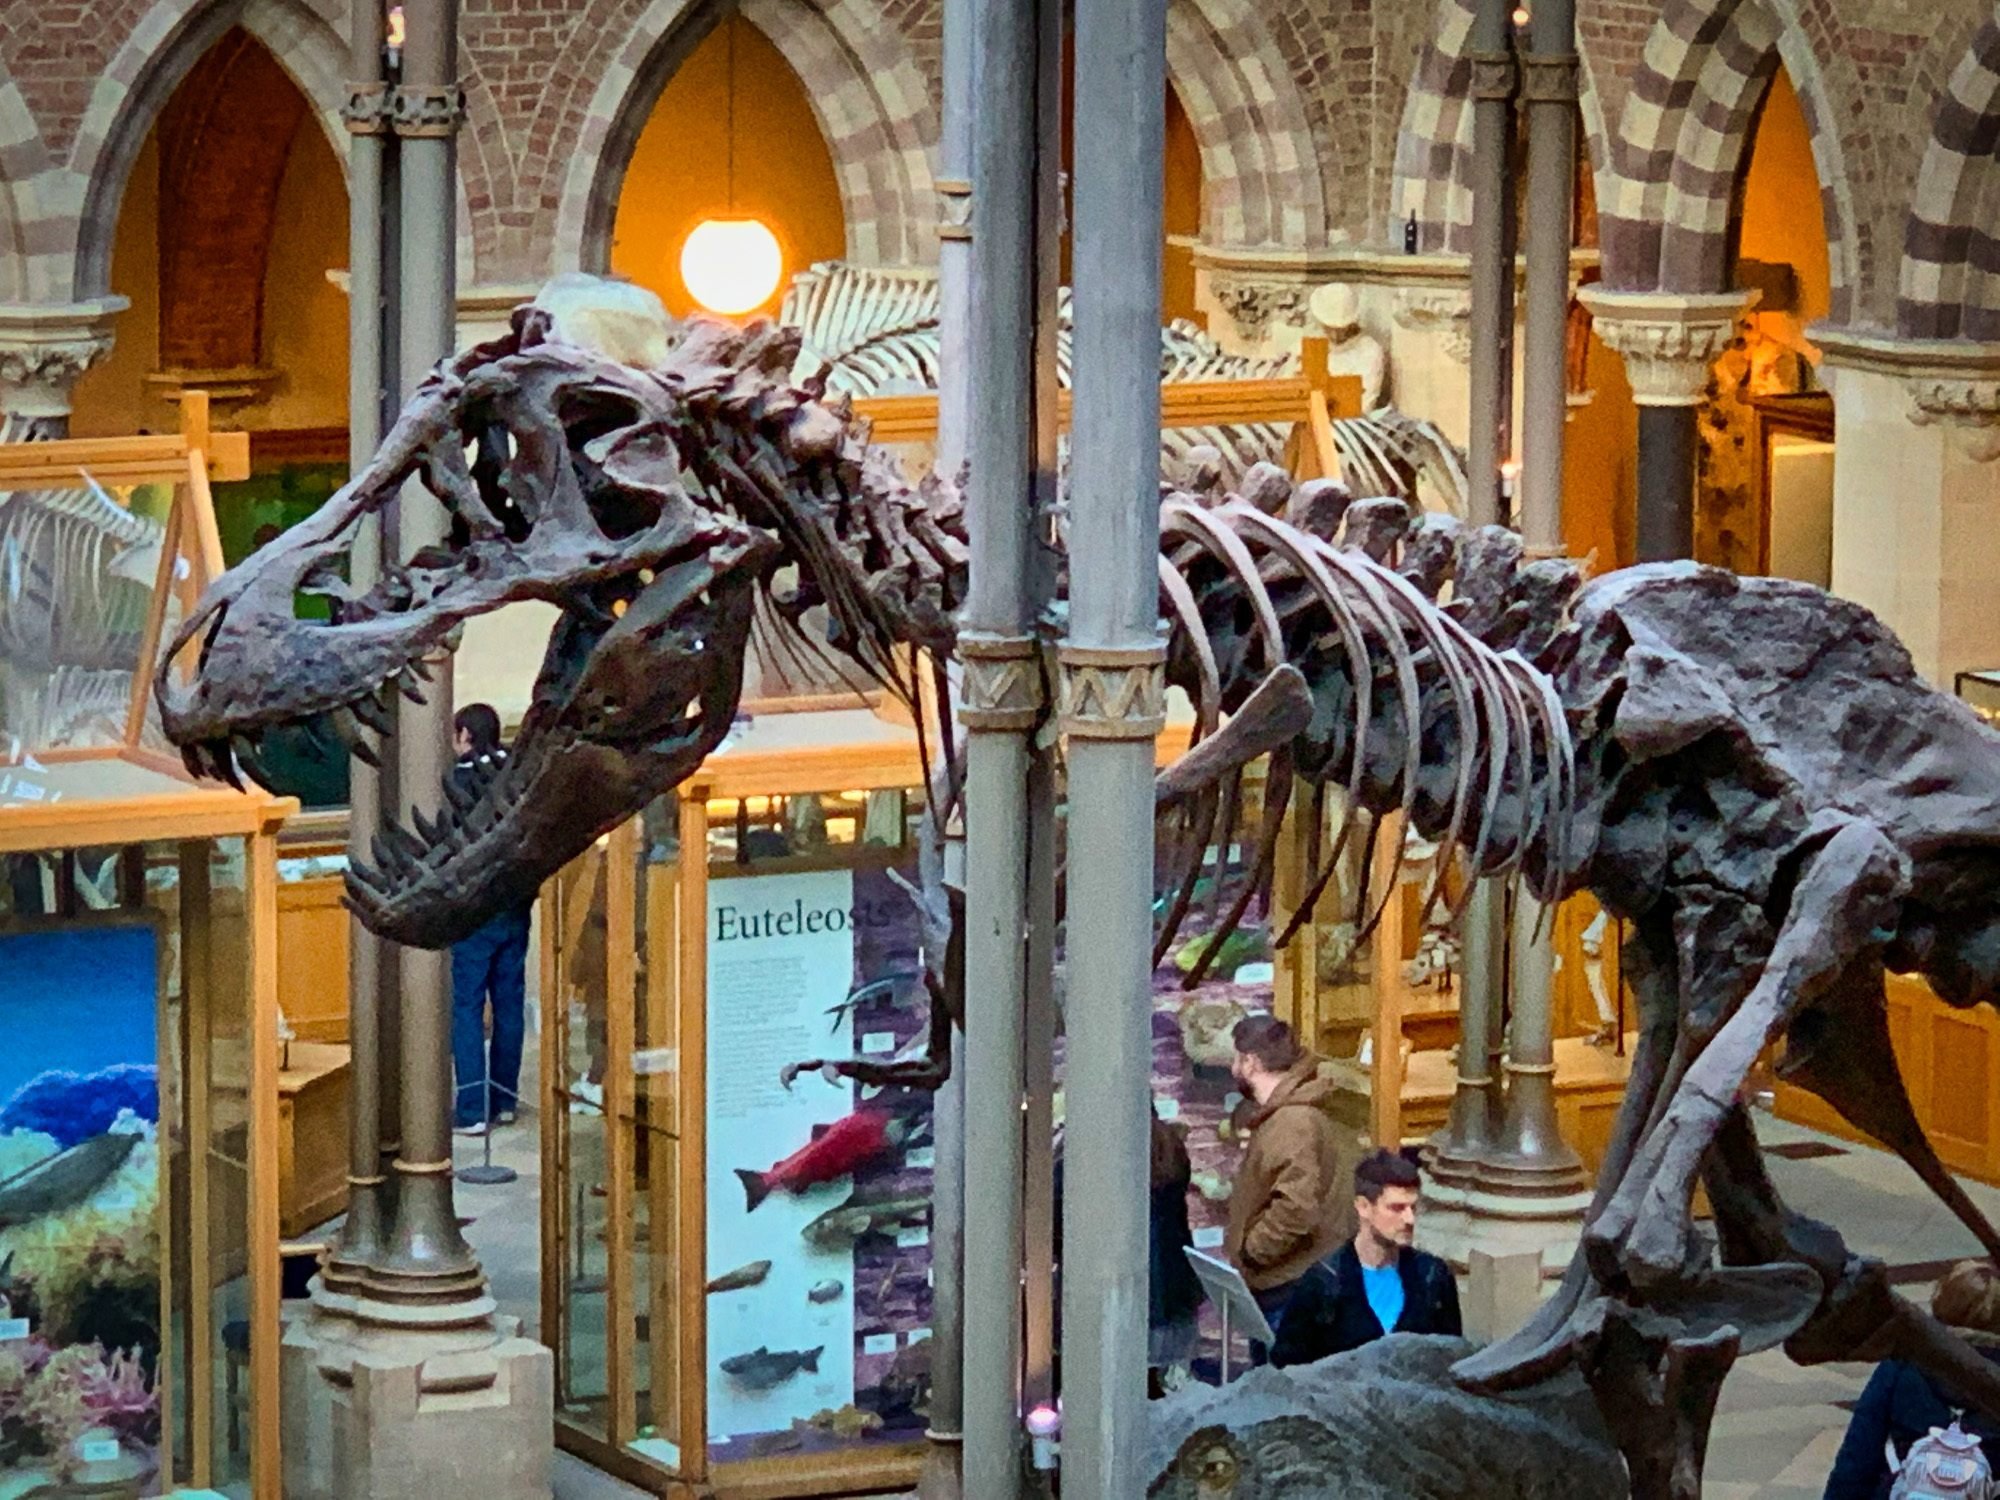 Oxford University Museum of Natural History & the Pitt Rivers Museum